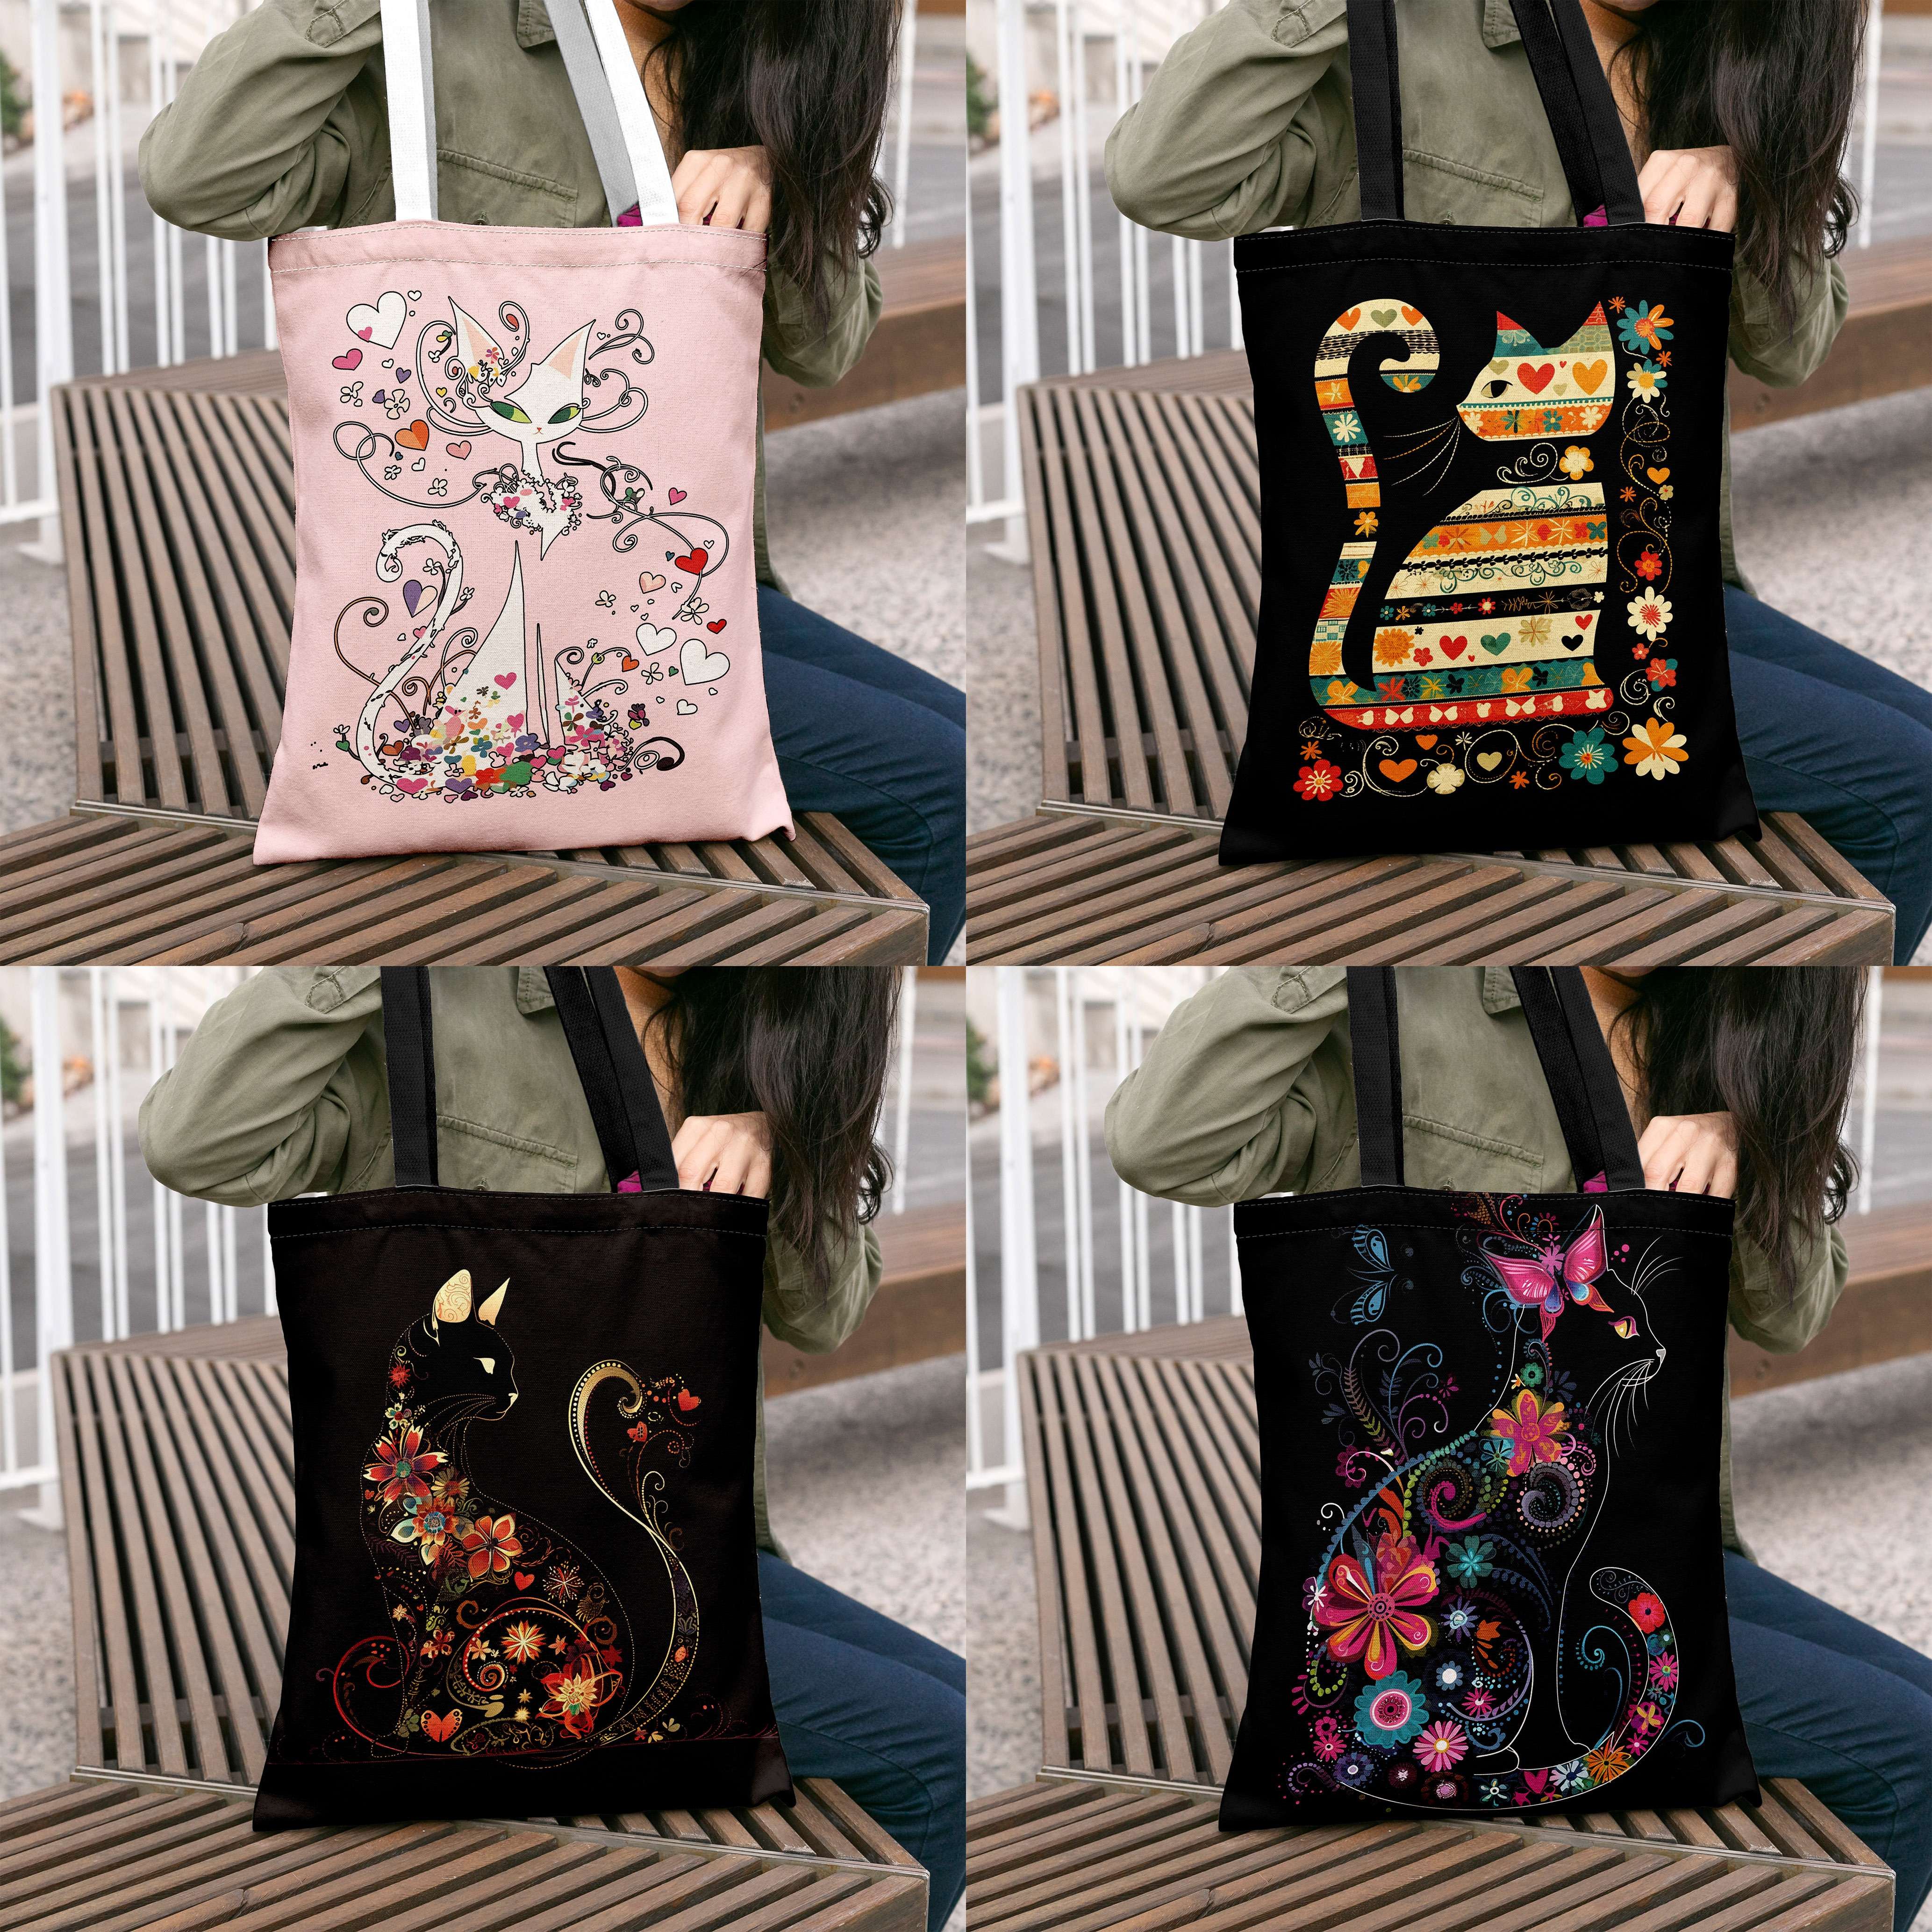 

Floral & Cat Pattern Canvas Tote Bag, Large Capacity Shopping Bag, Portable Casual Handbag, Perfect For Everday Use & Valentine's Day